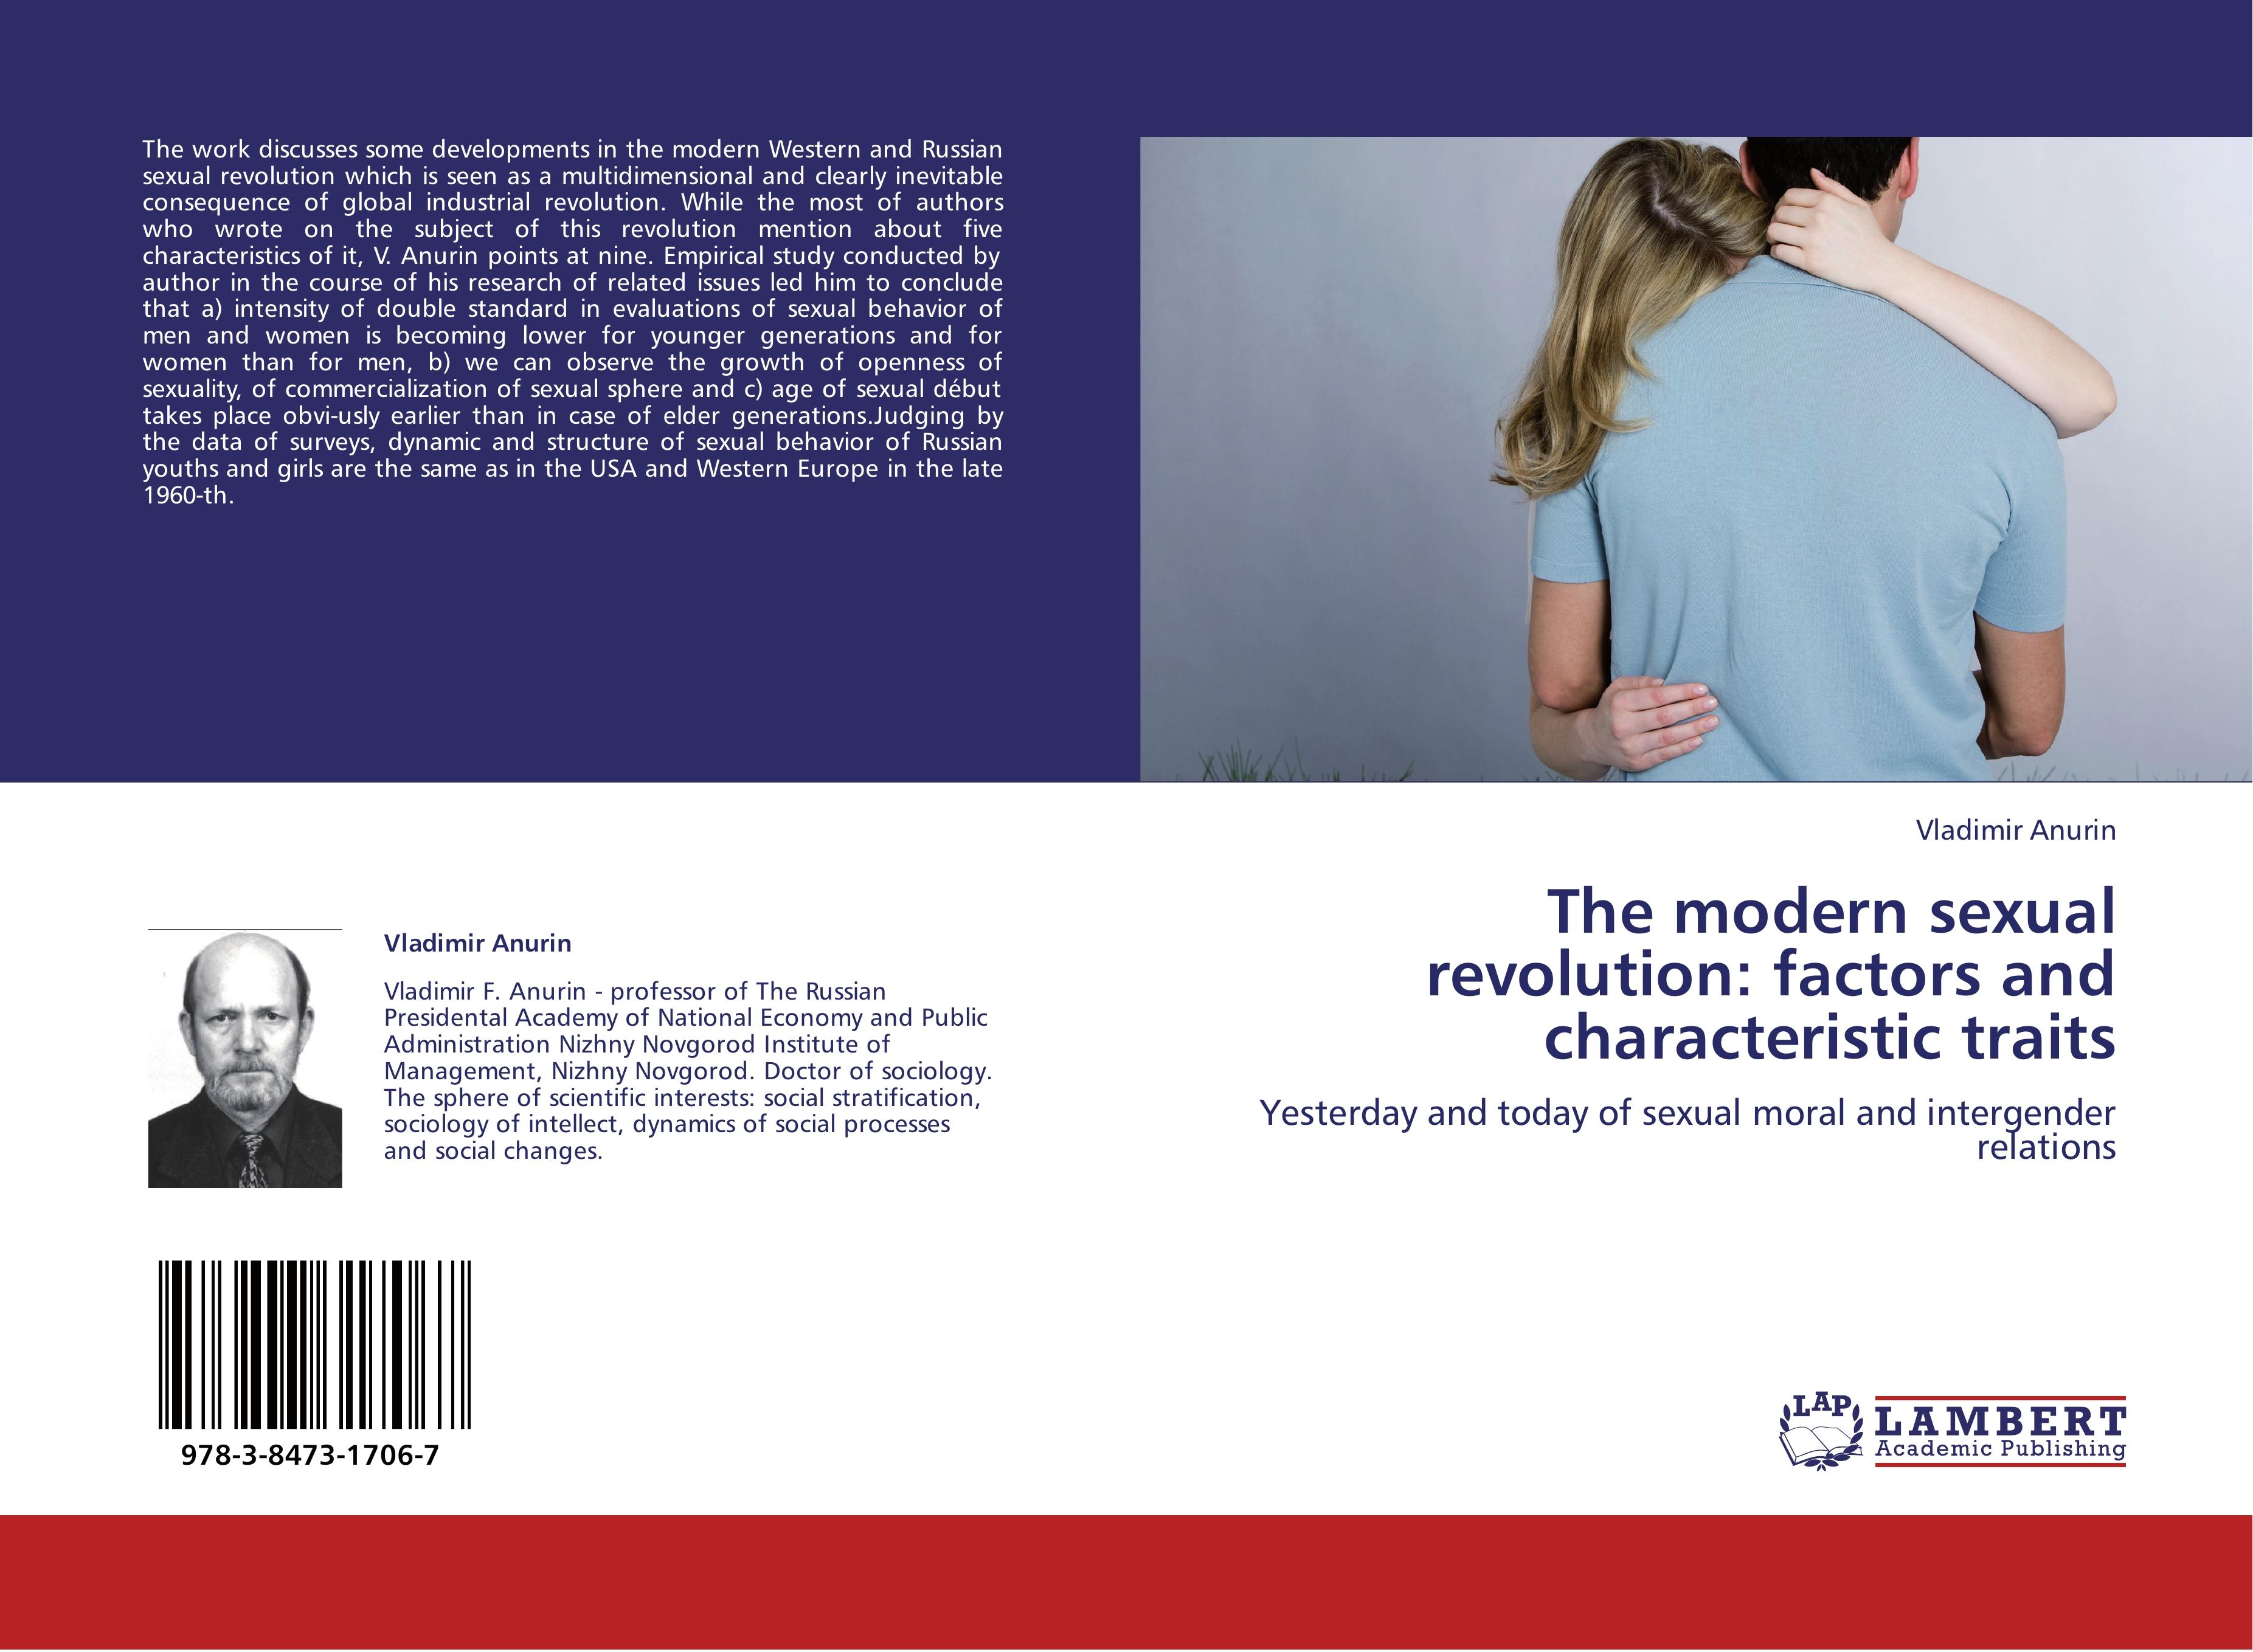 The modern sexual revolution: factors and characteristic traits | Yesterday and today of sexual moral and intergender relations | Vladimir Anurin | Taschenbuch | Paperback | 60 S. | Englisch | 2011 - Anurin, Vladimir